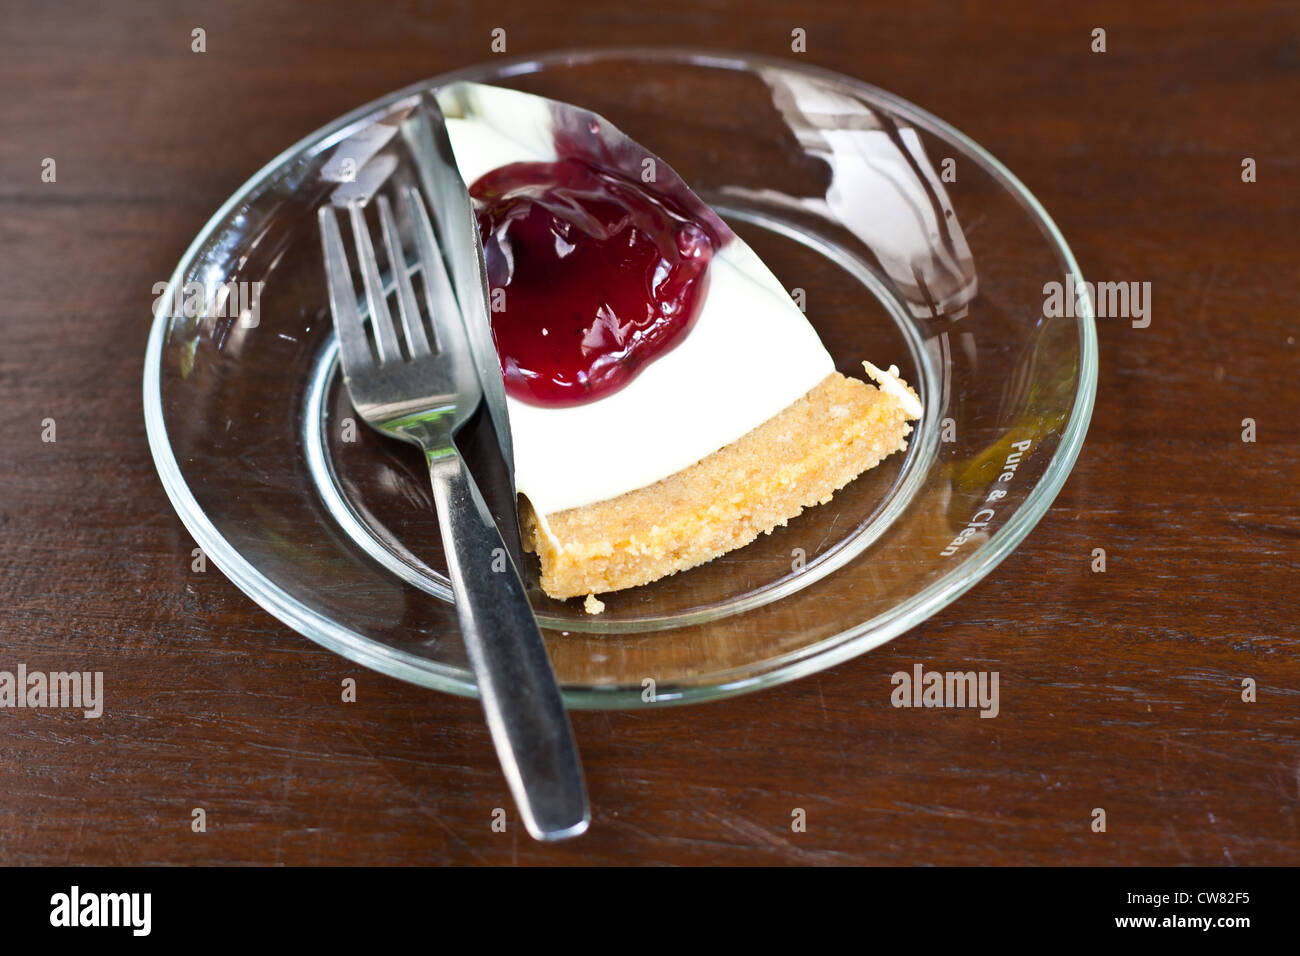 Blue Berry Cheese Cake on Glass plate. Stock Photo